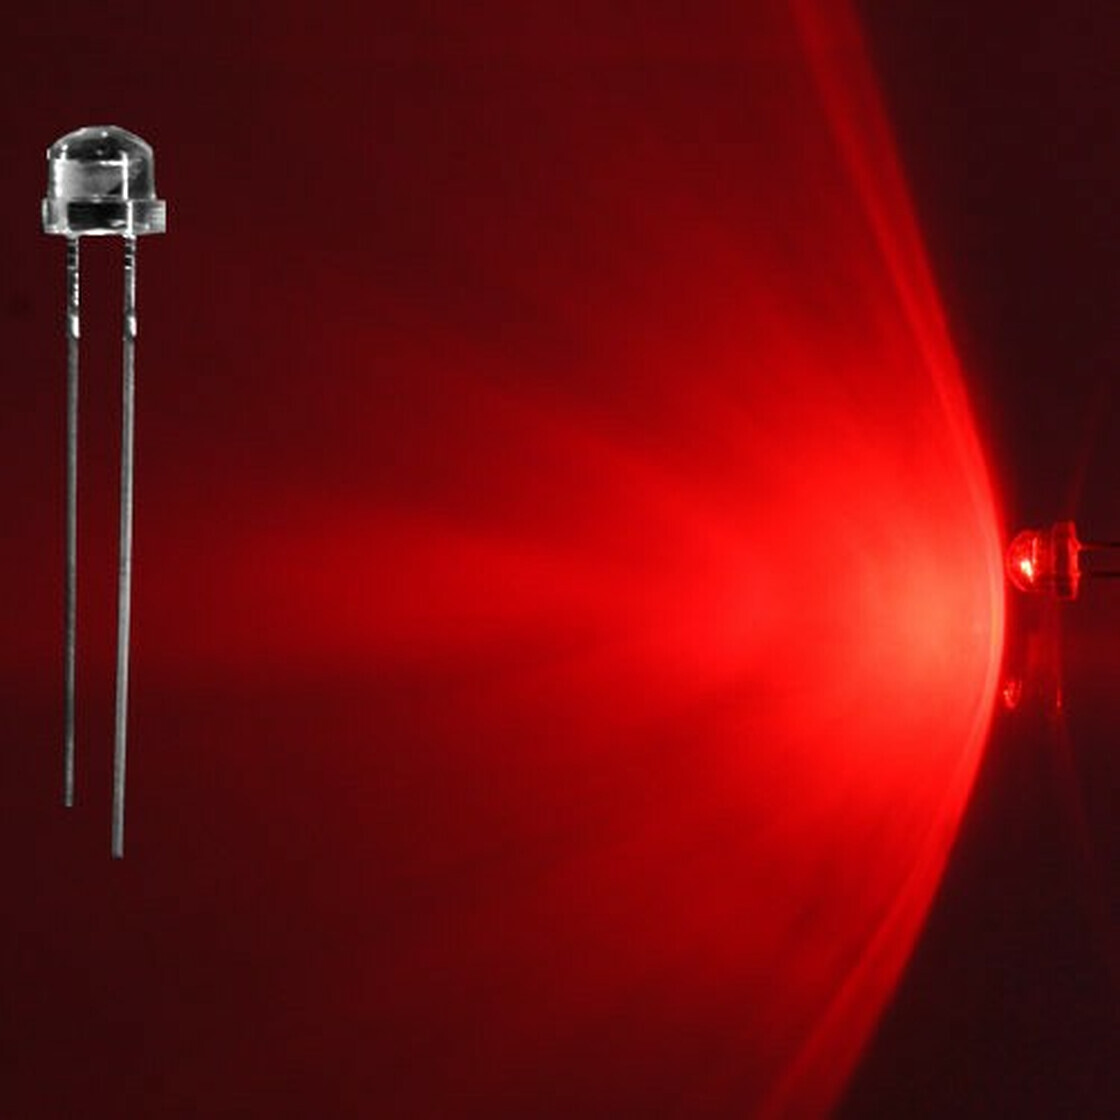 LED 5mm rot weitwinkel 120° inkl. Widerstand - 10er-Pack, 1,84 €